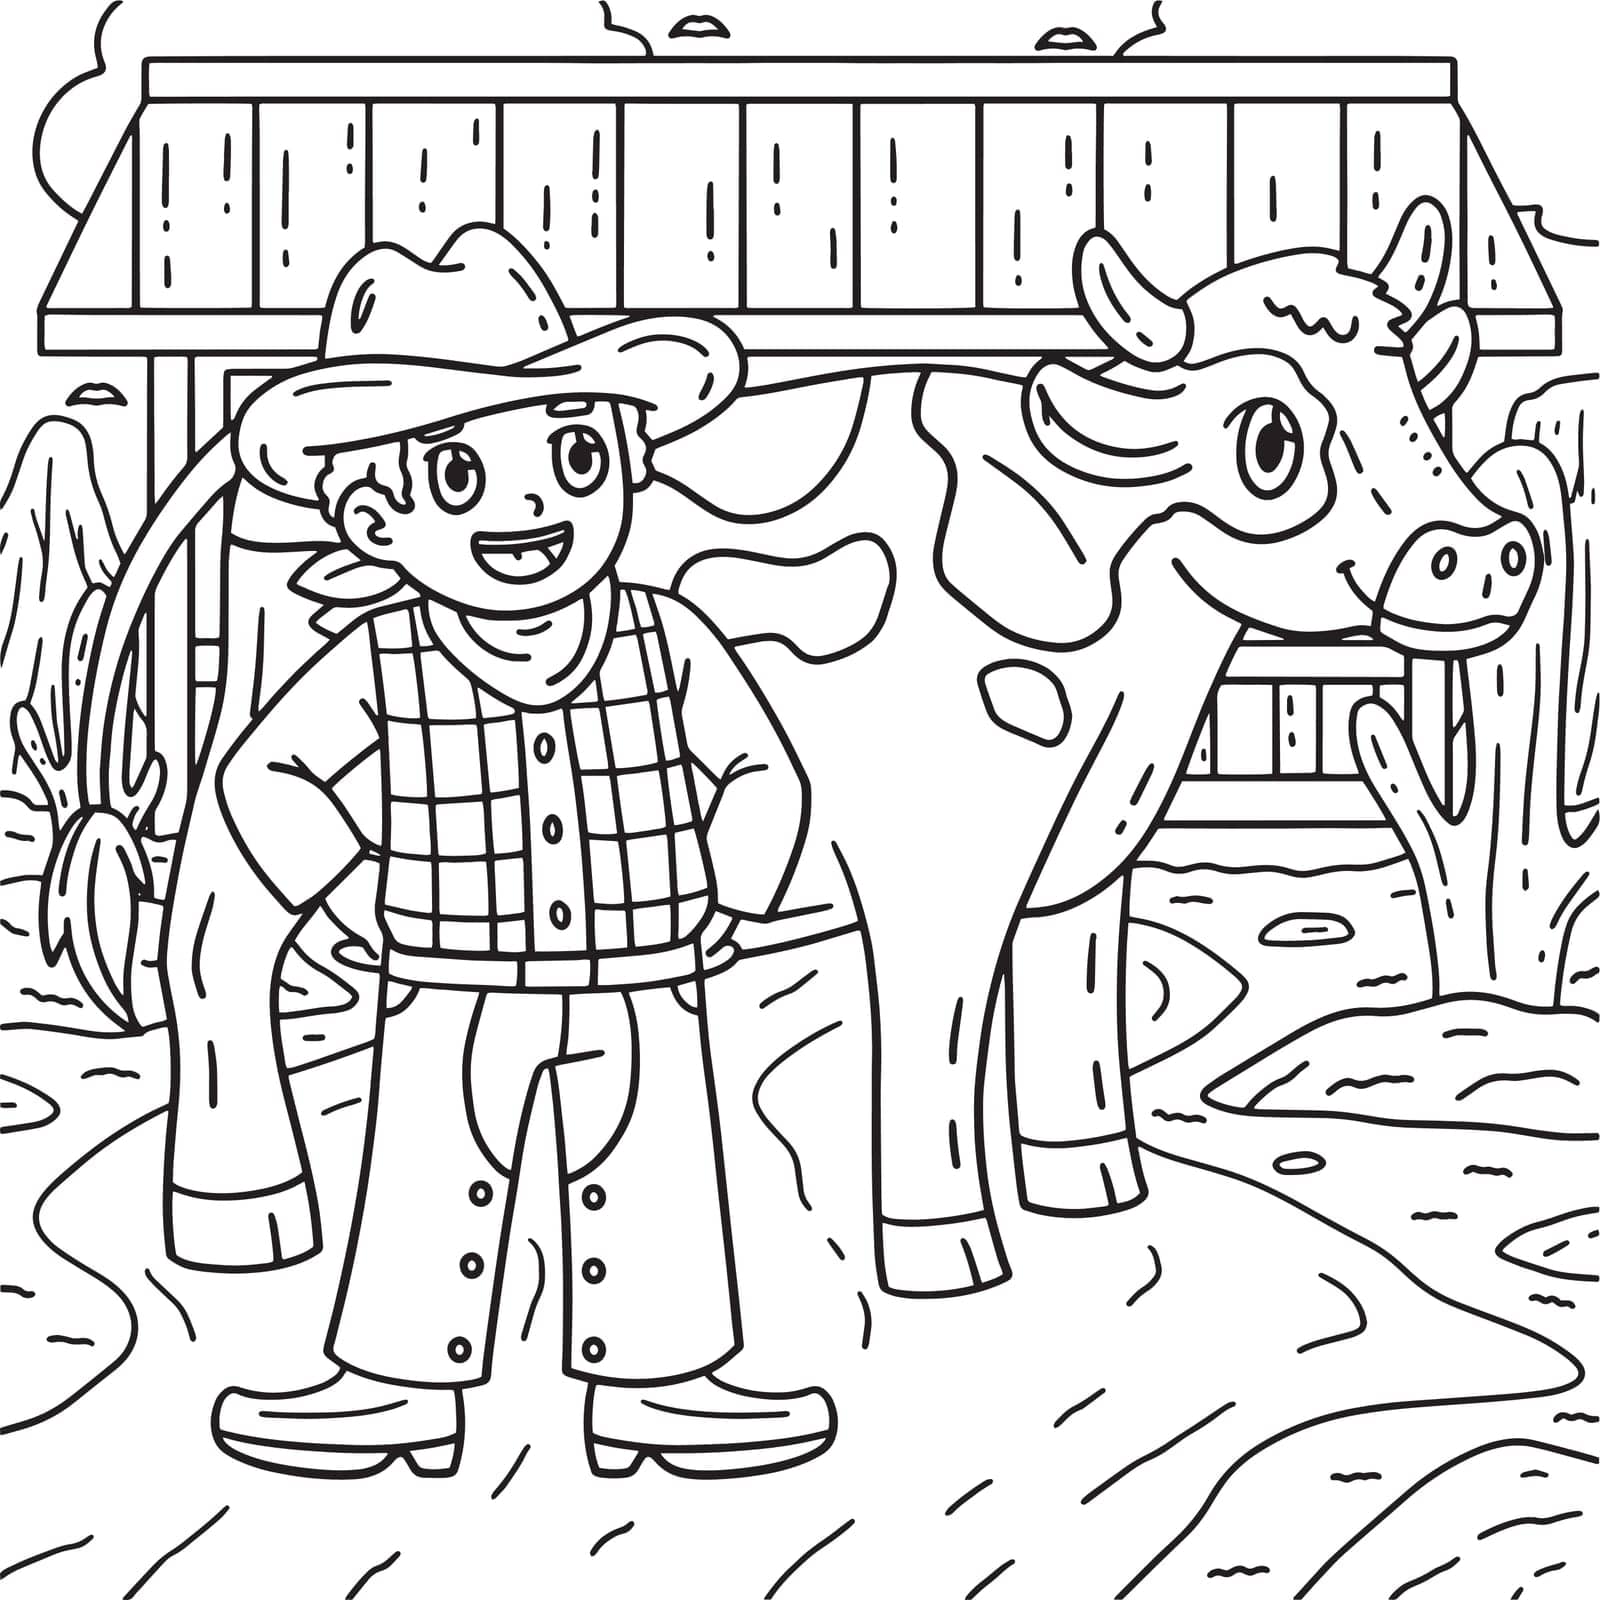 A cute and funny coloring page of a Cowboy and Cow. Provides hours of coloring fun for children. To color, this page is very easy. Suitable for little kids and toddlers.